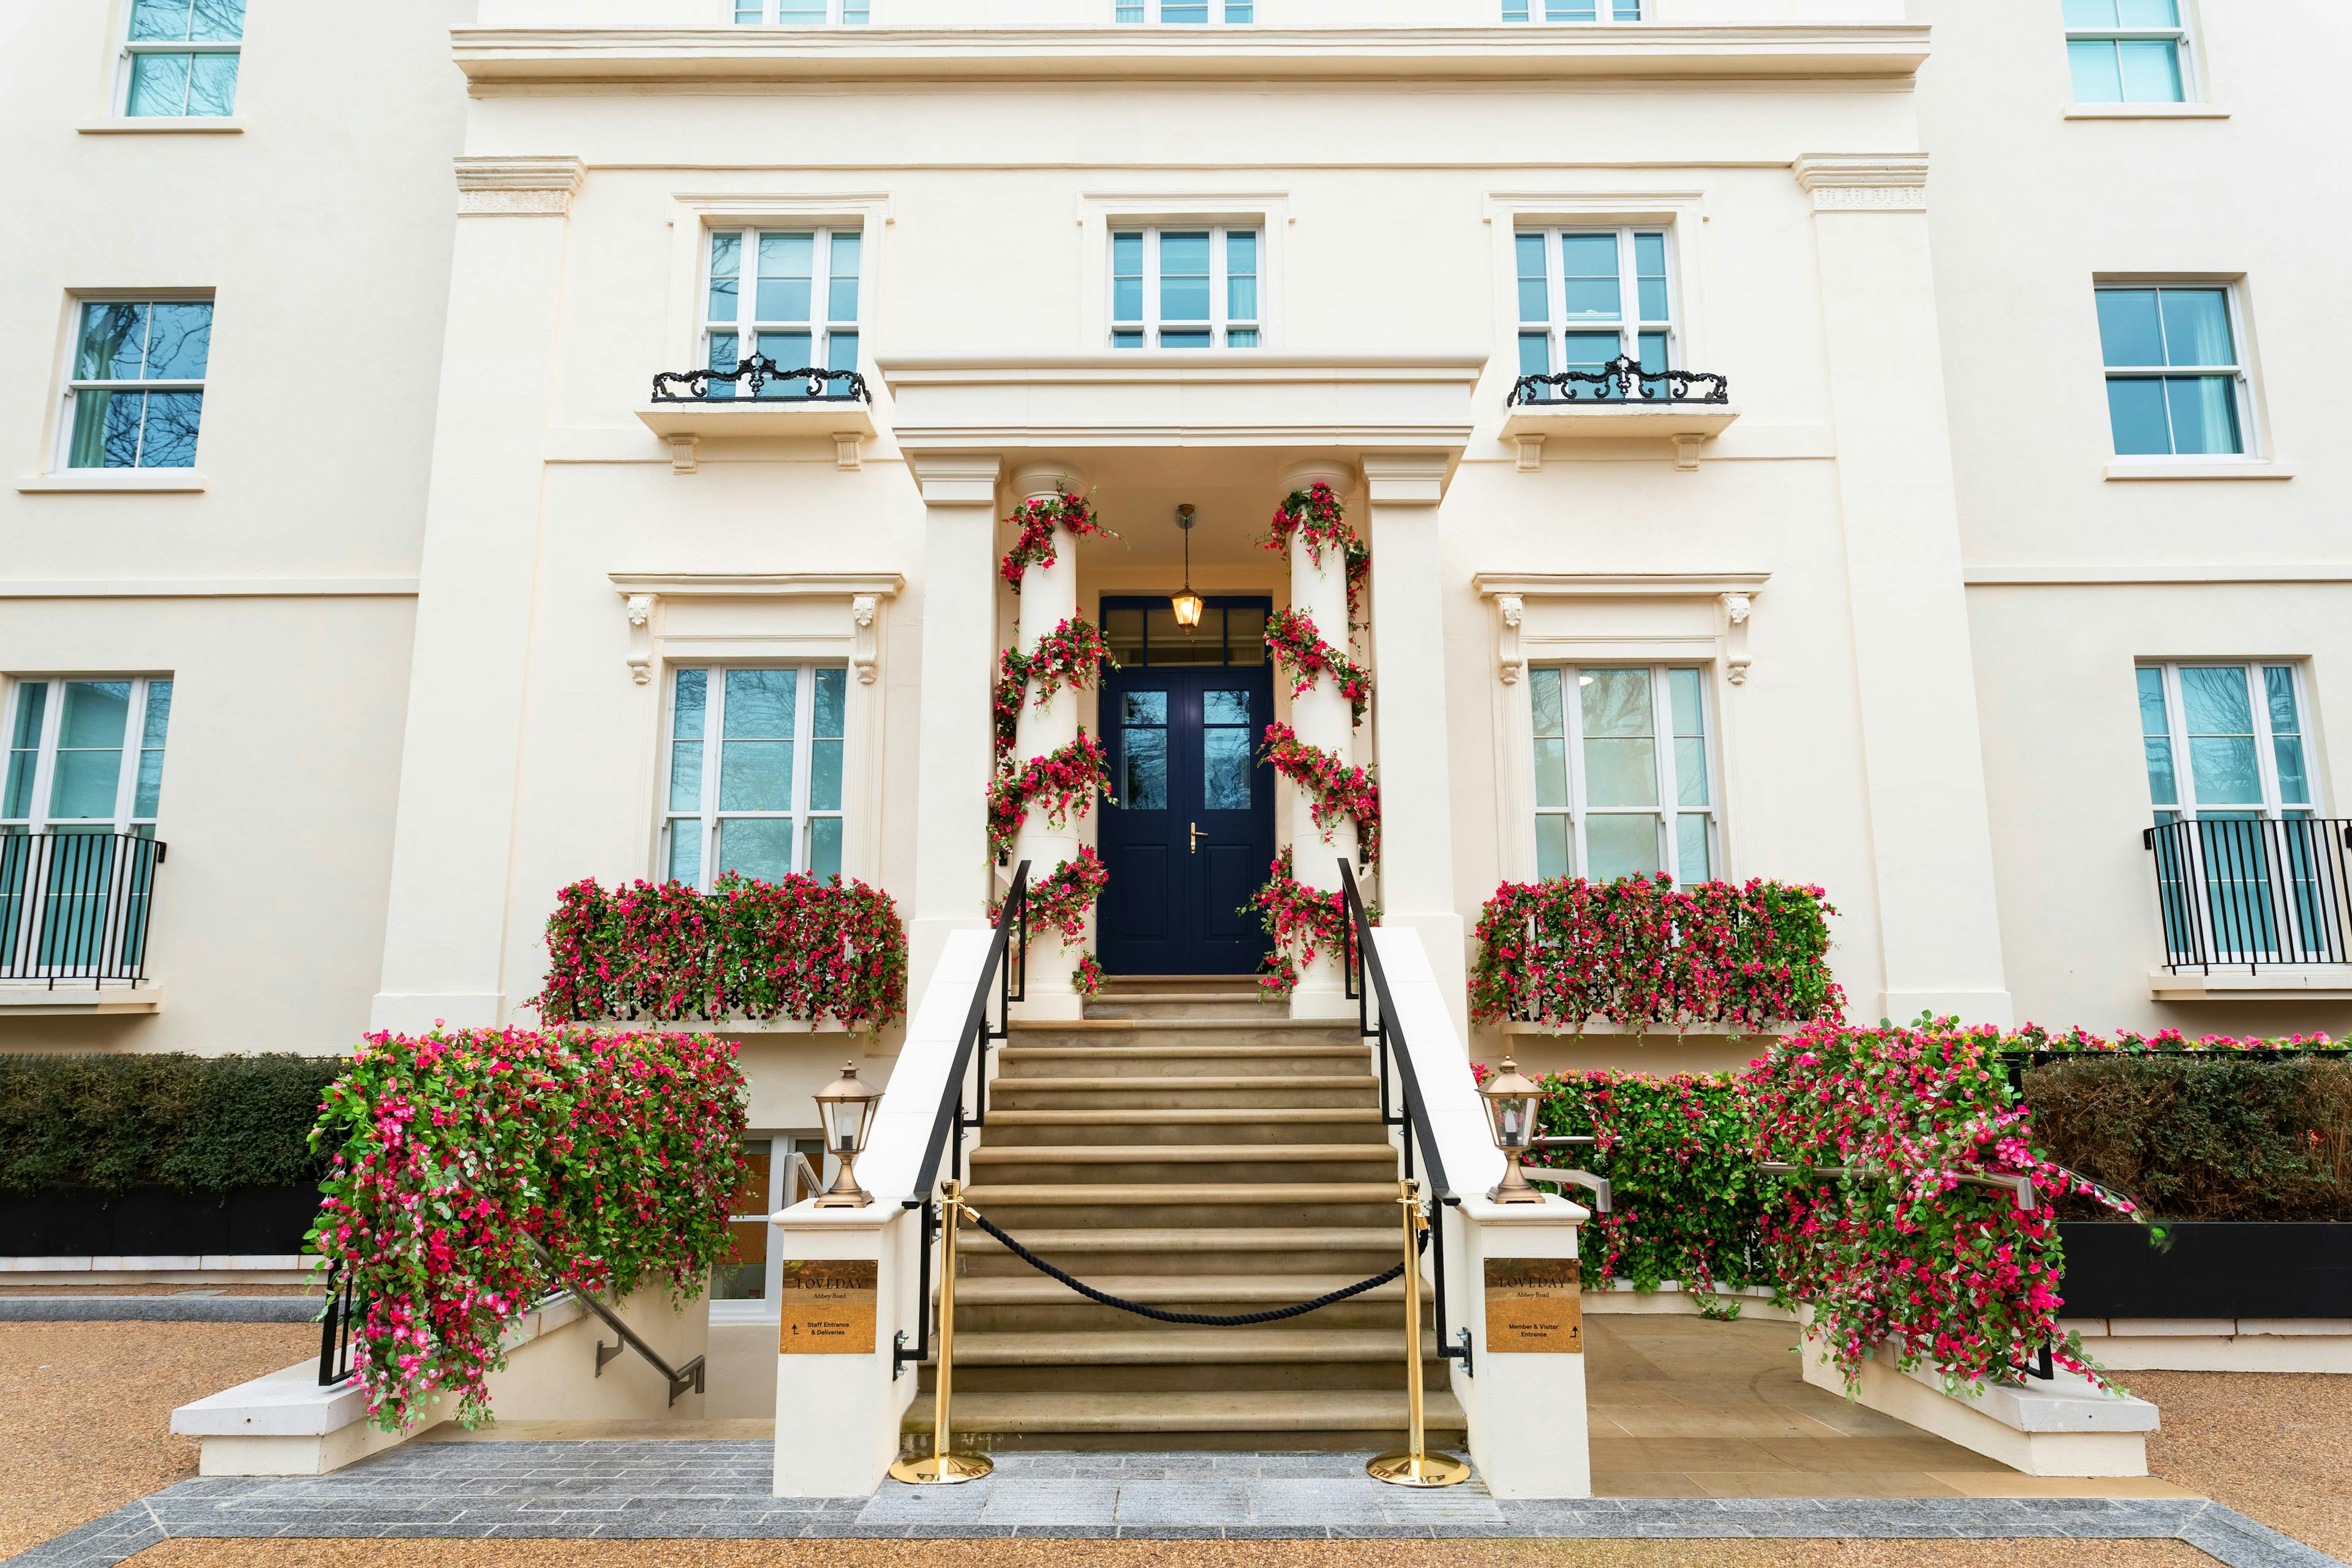 Exterior of Abbey Road Care Home in London, England